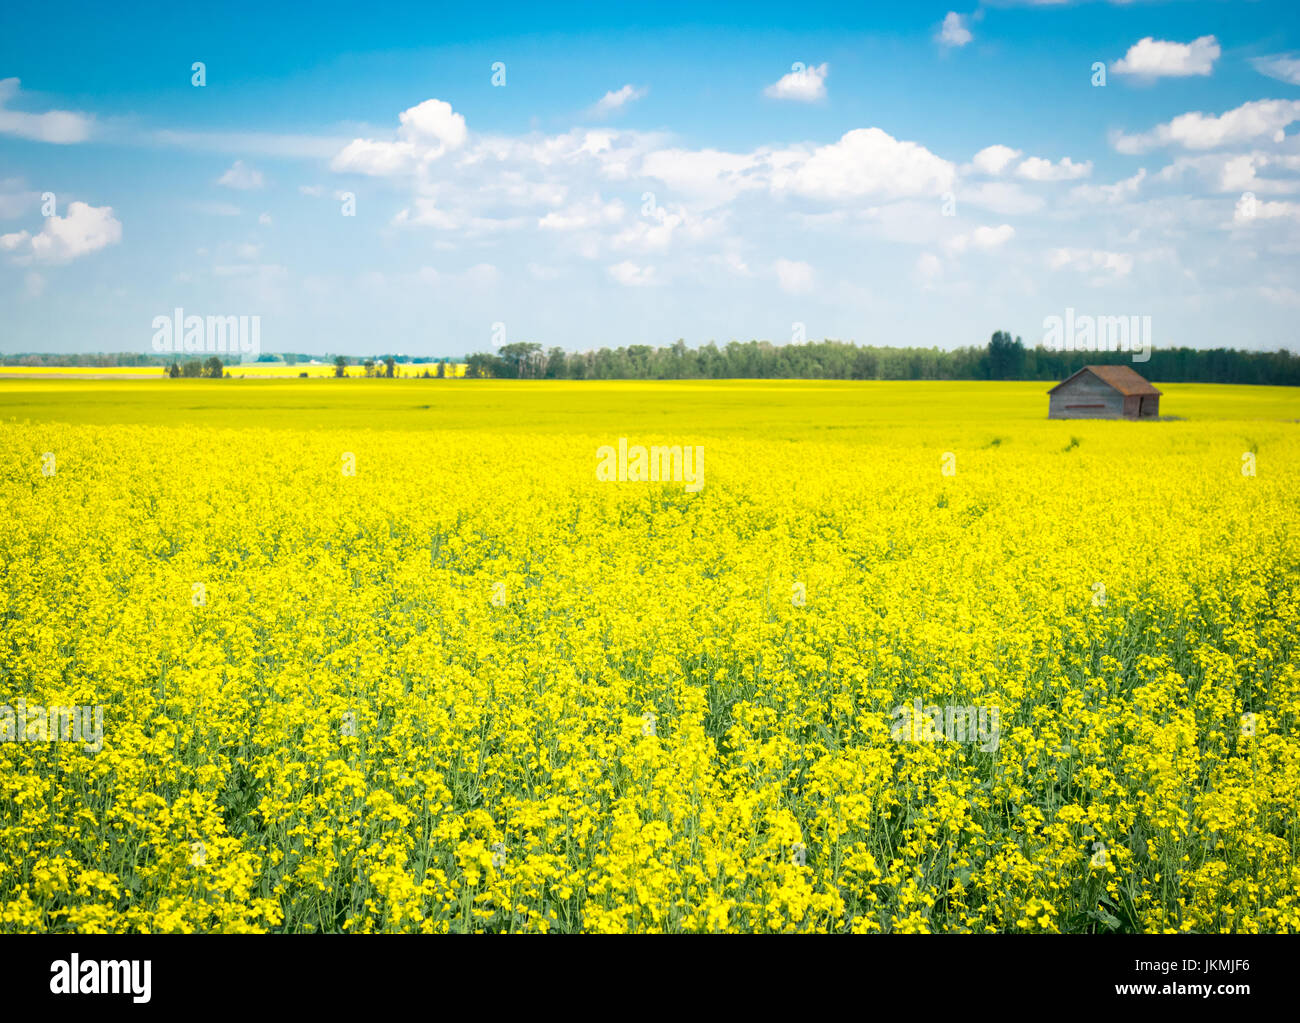 The brilliant yellow flowers of a canola field near Beaumont, Alberta, Canada. Stock Photo